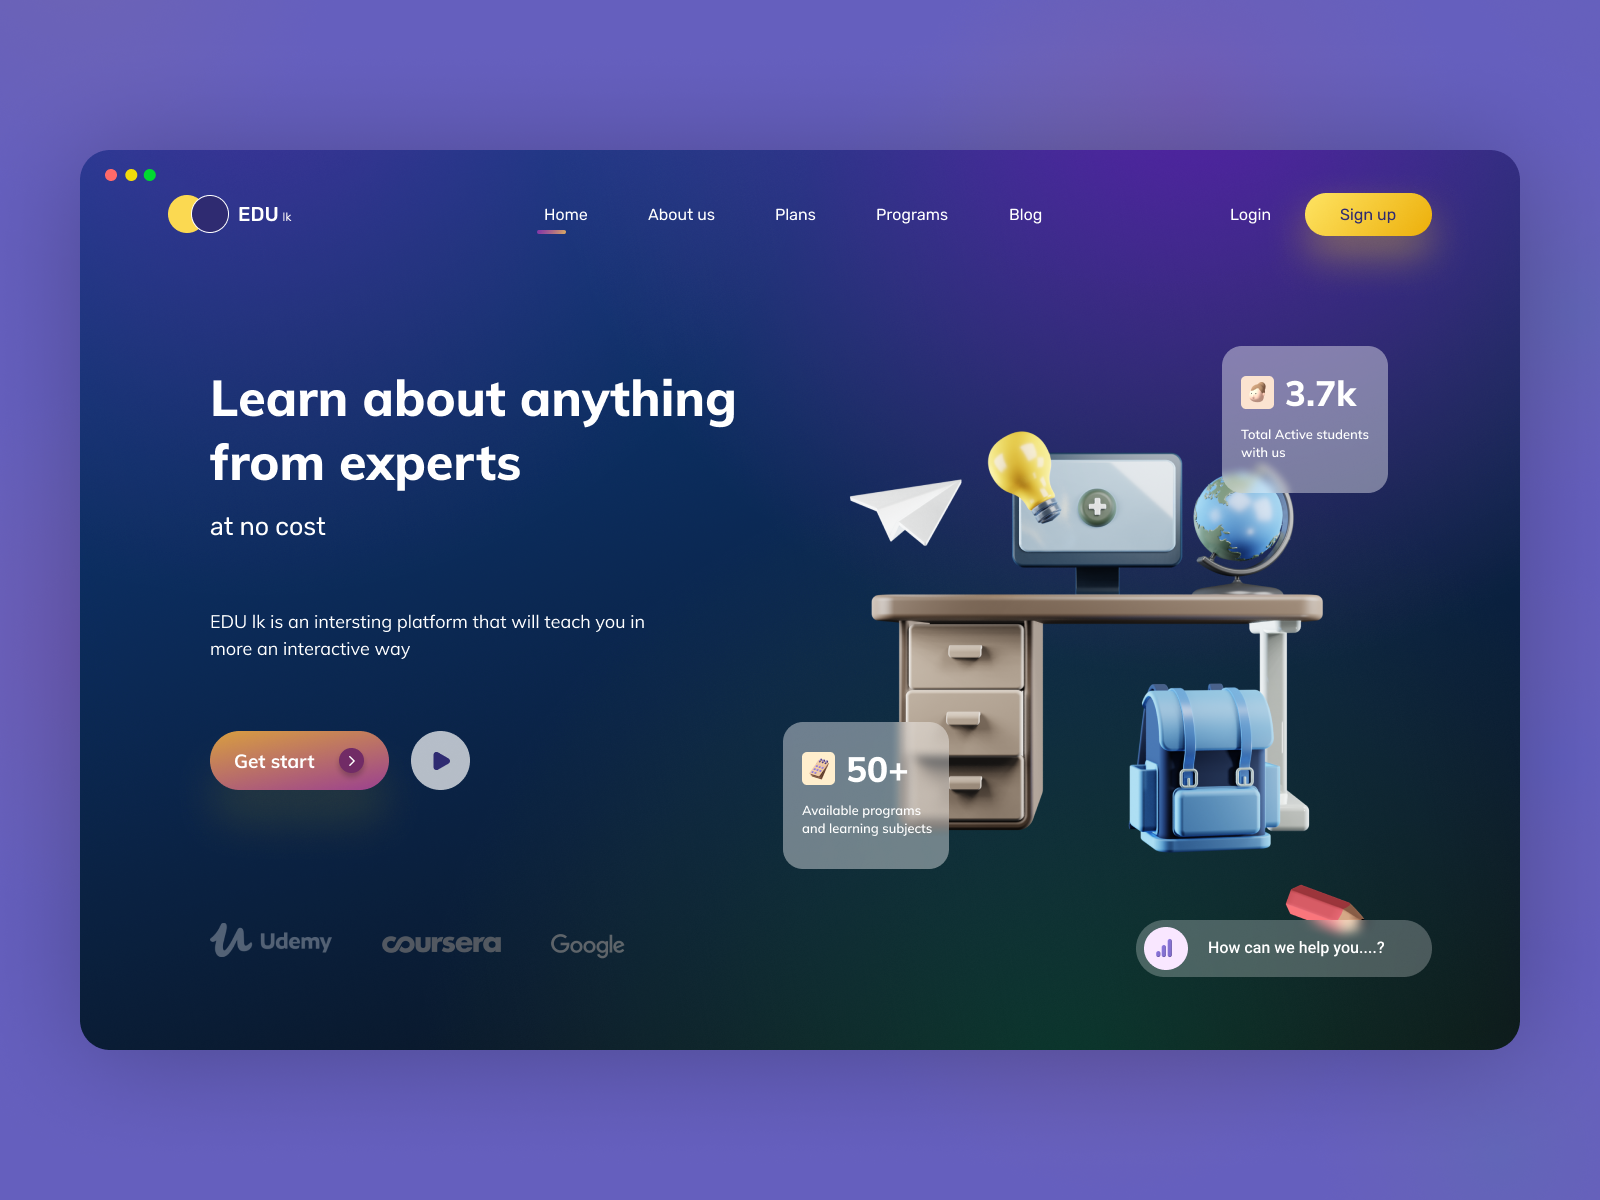 learning code hero header Exploration by Zesan h. on Dribbble